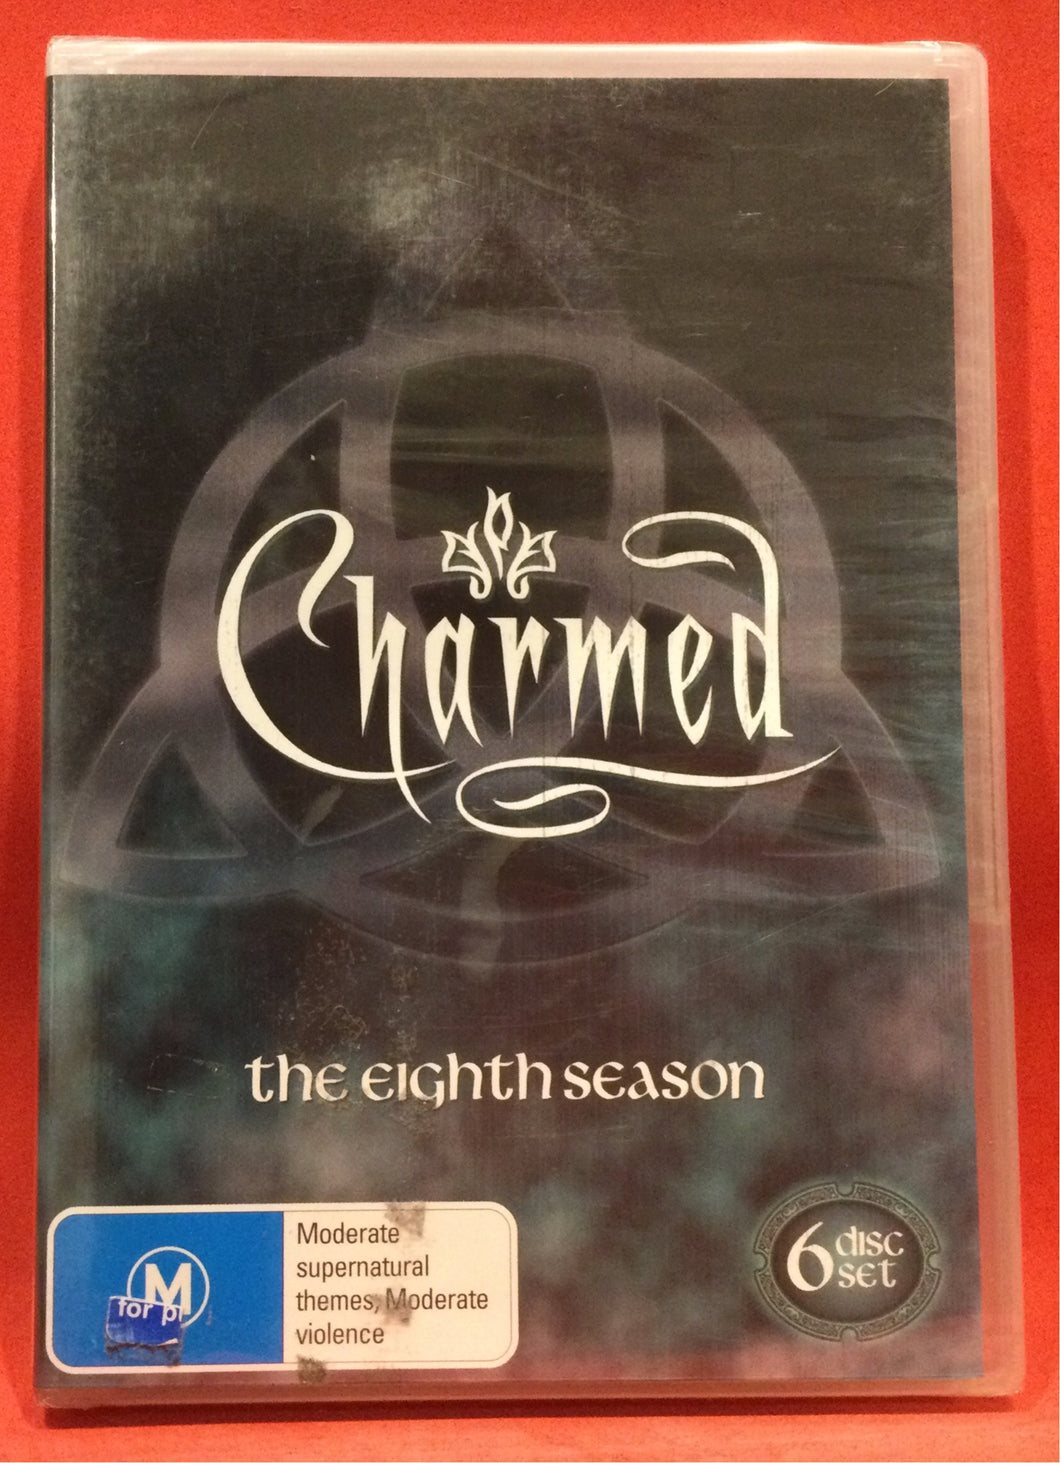 CHARMED - THE EIGHTH SEASON - 6 DVD DISCS (SEALED)